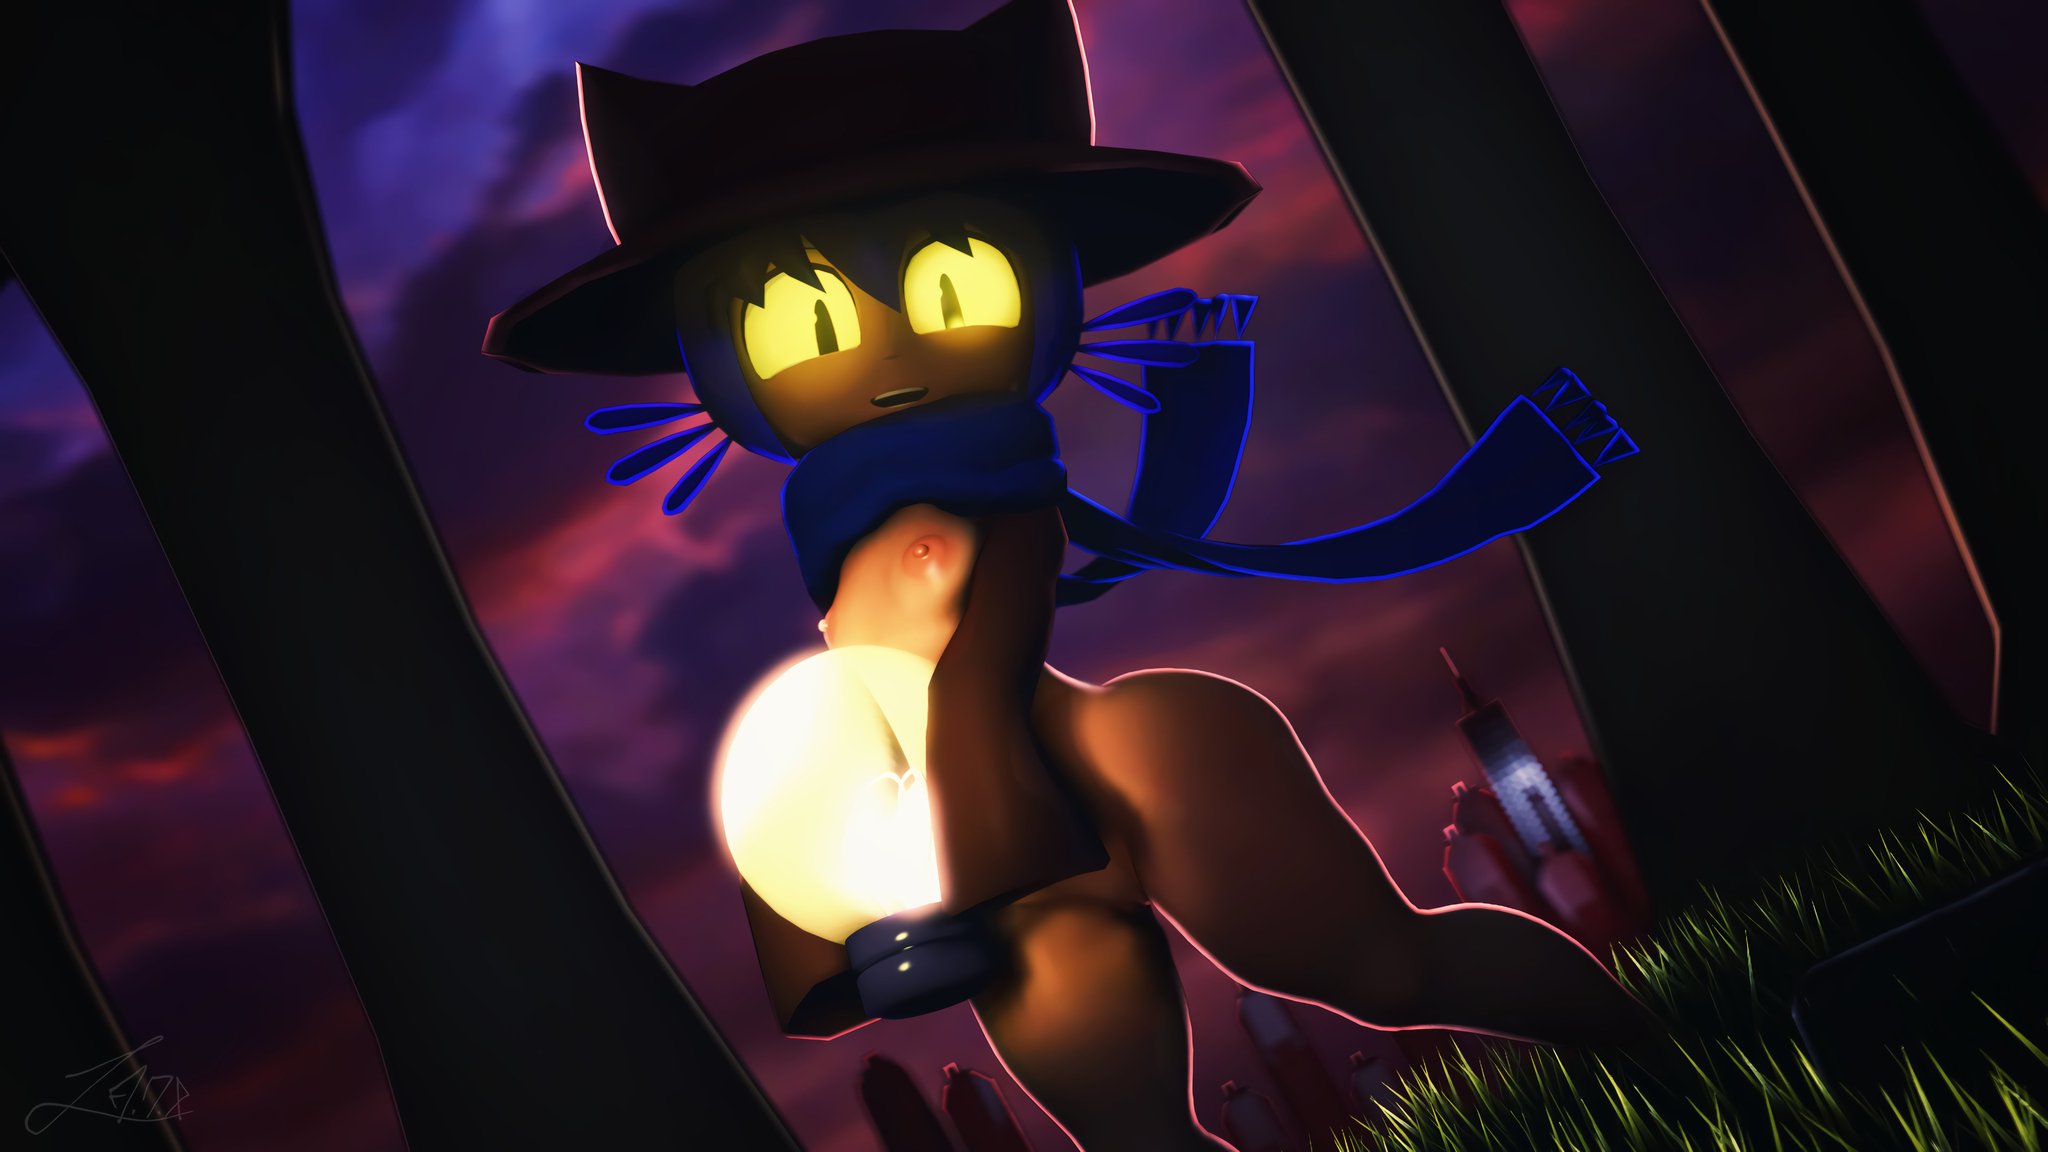 “Made some Niko with a smol variant too Support me -w- https://t.co/e1AiGex...